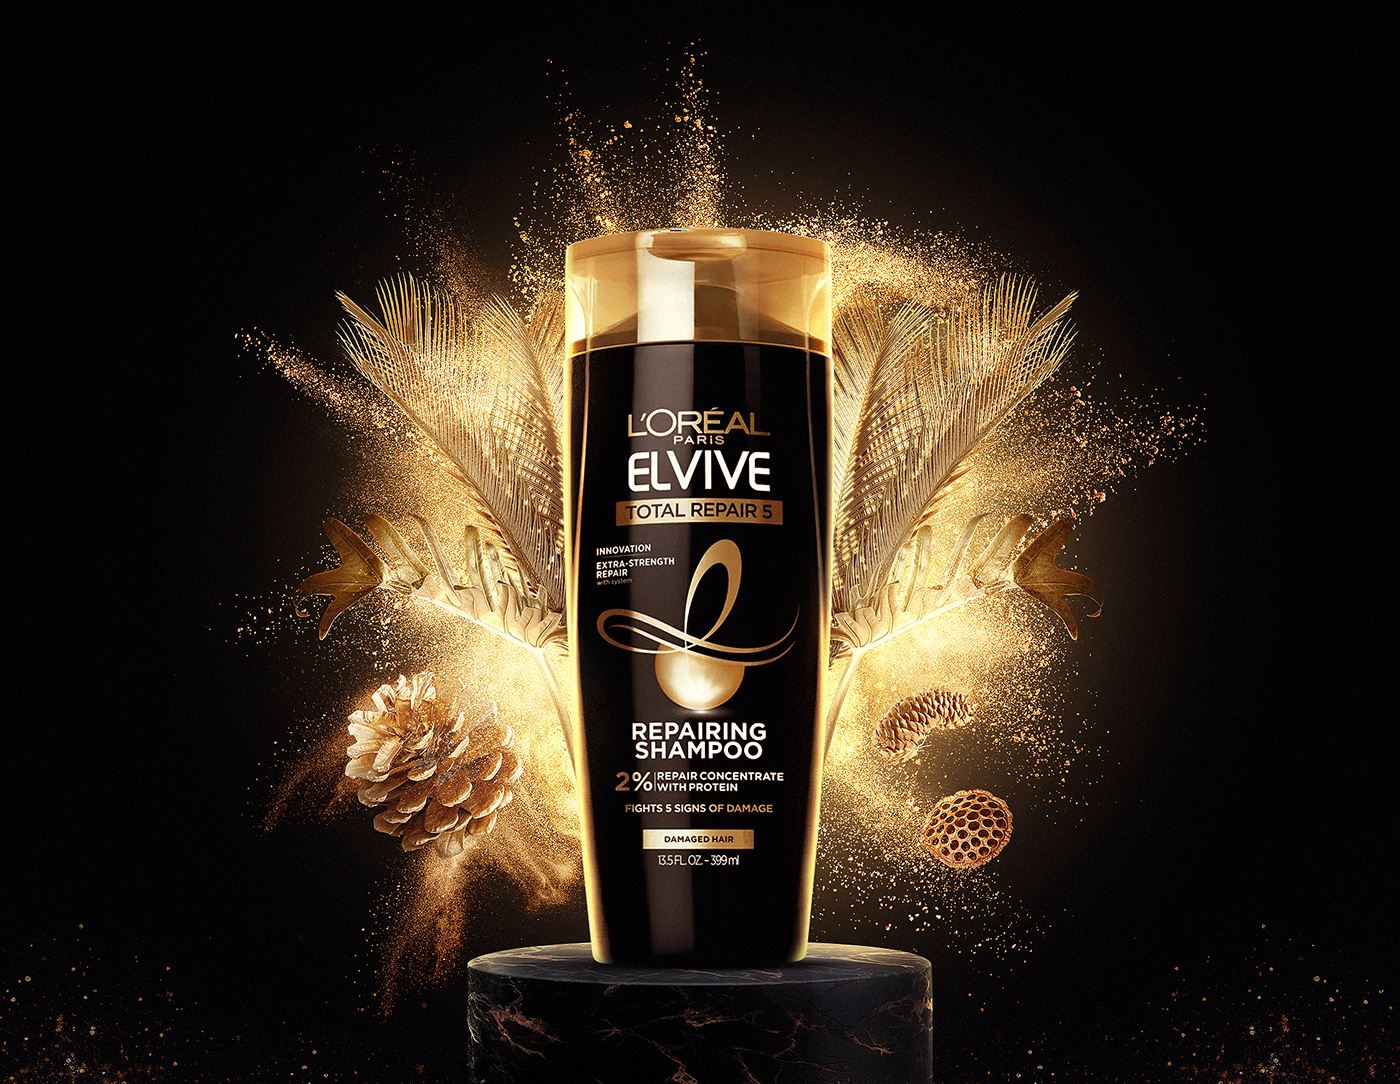 l'oreal Elvive shampoo hair Hair Product poster social media Outdoor campaign ad